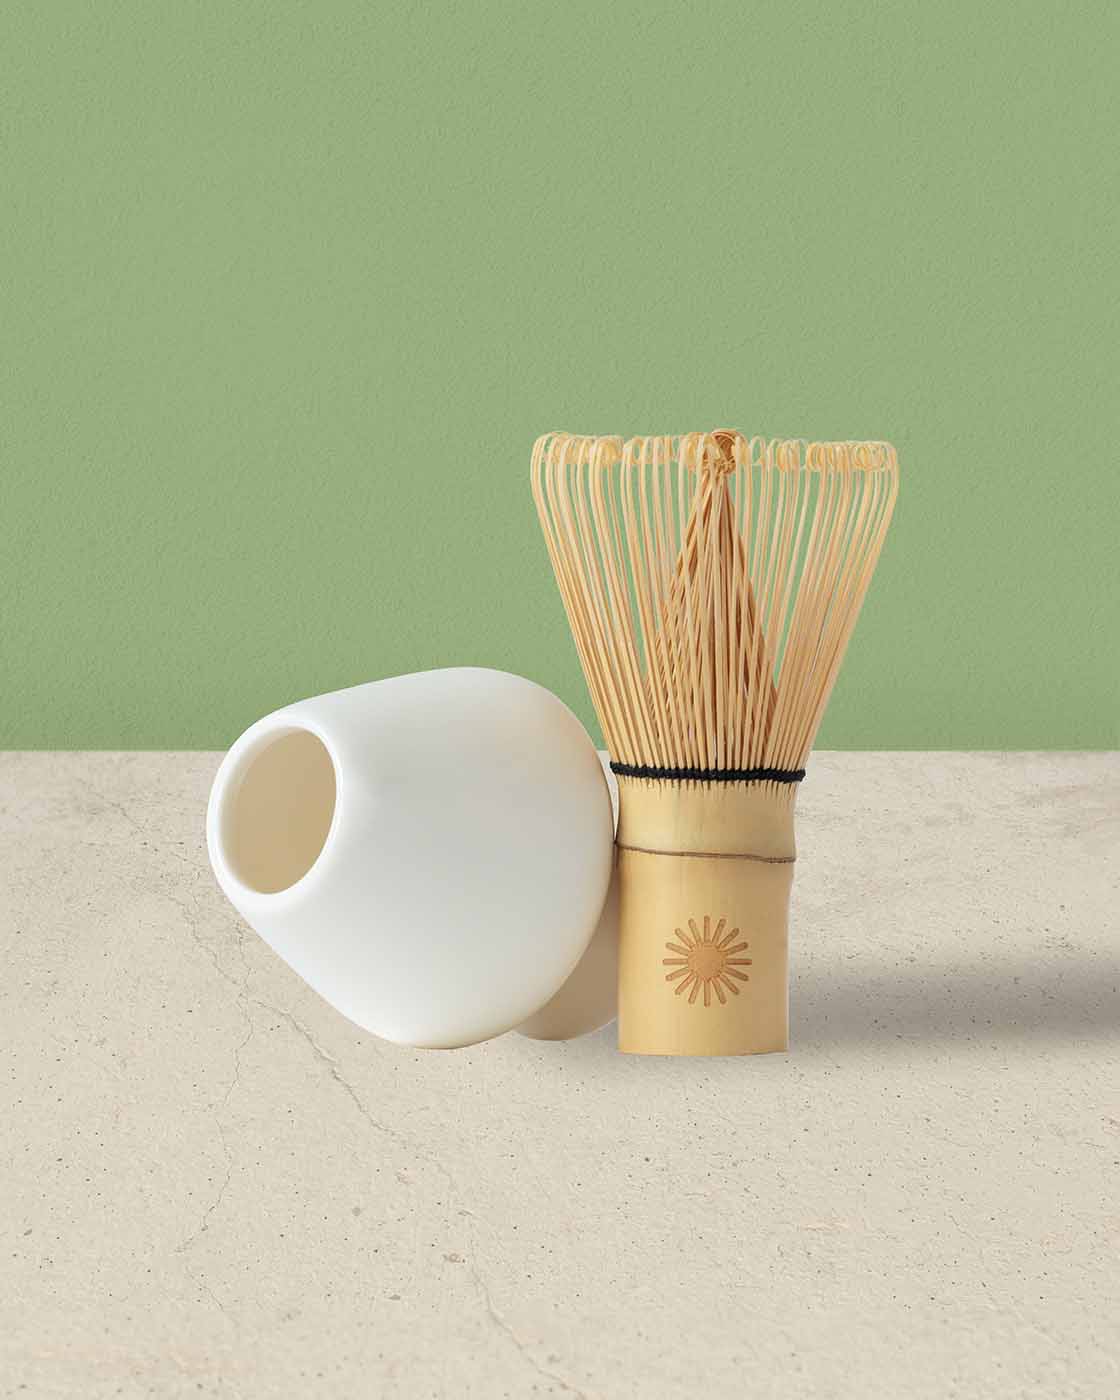 The Chasen Kusenaoshi Whisk Holder are made in ceramic and they are very durable